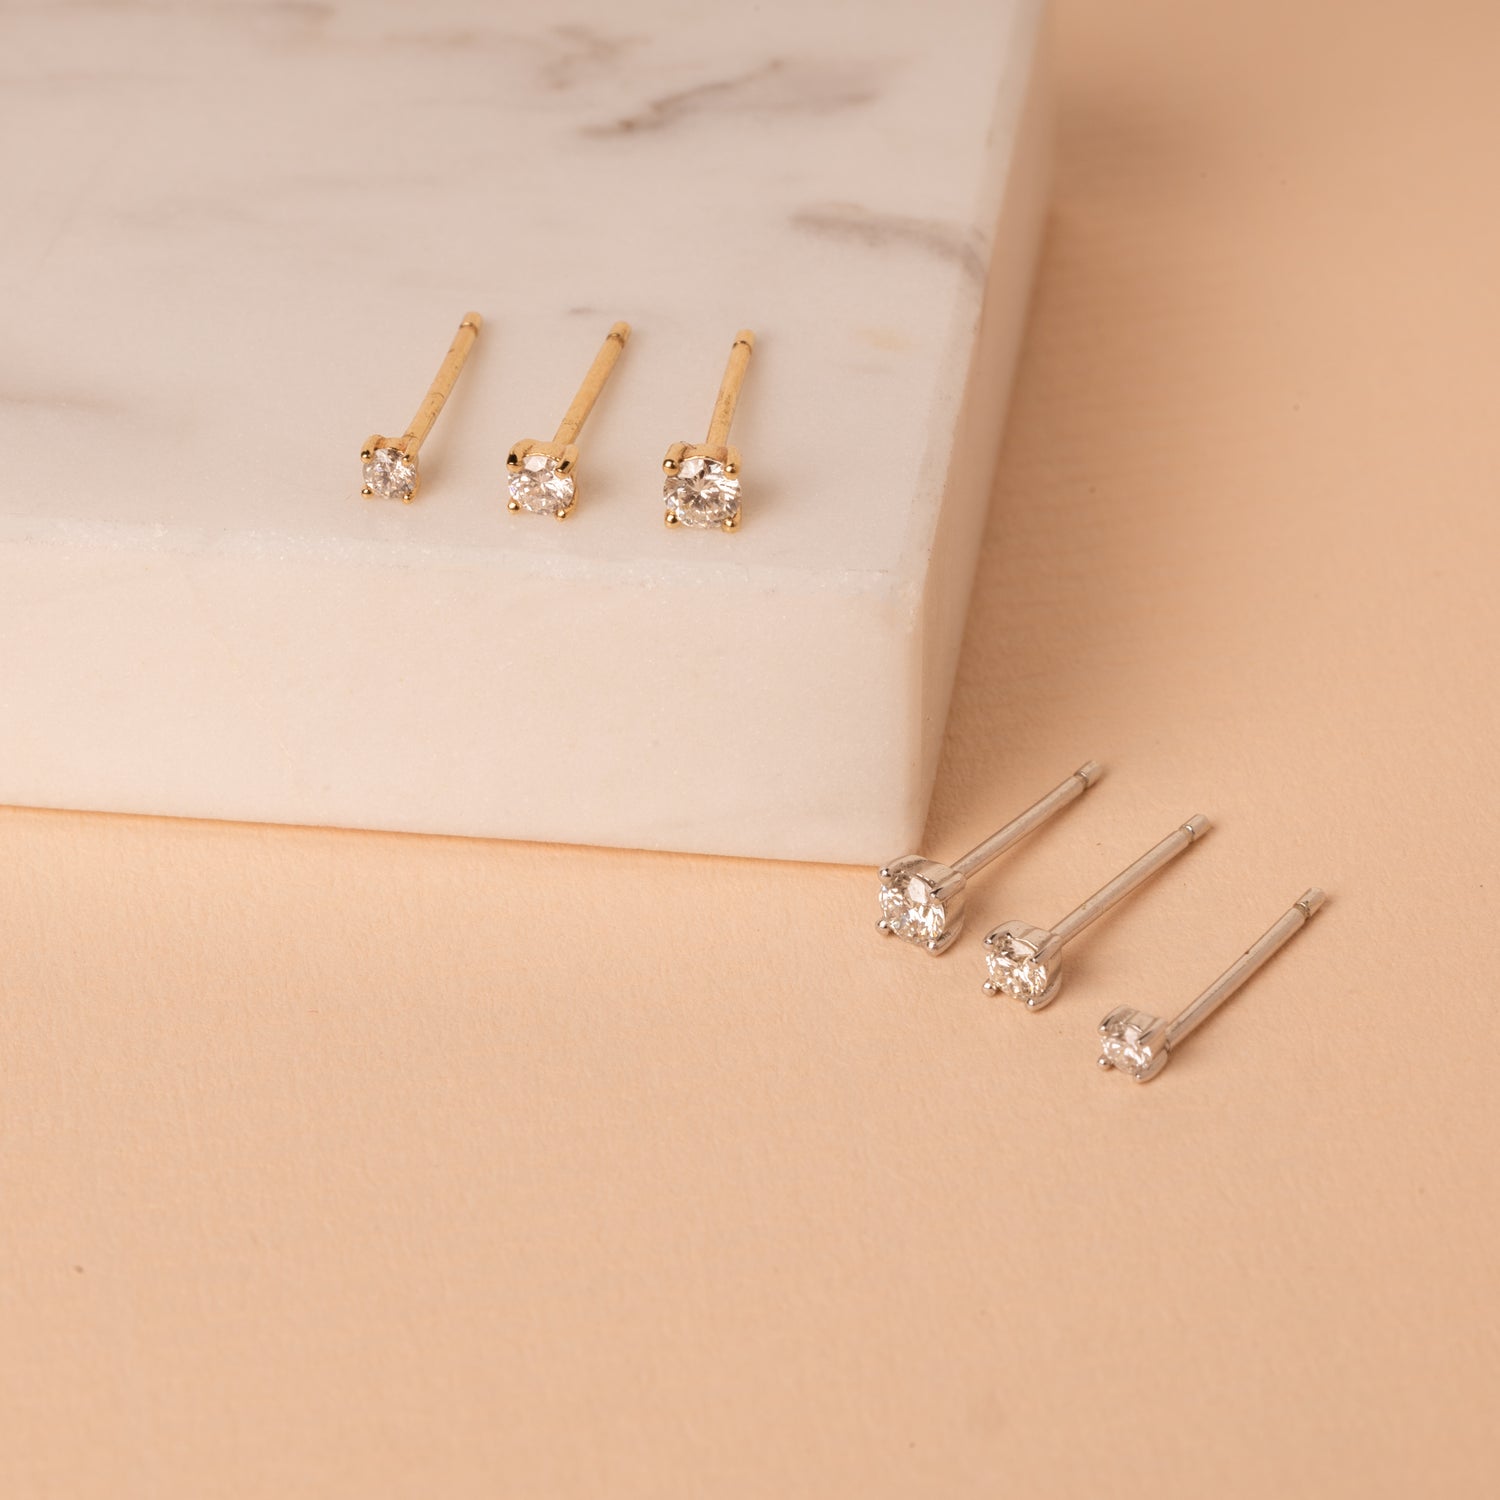 14K Real Diamond Baby infinity Stud Earrings, Real Solid Gold Micropavé  Natural | eBay